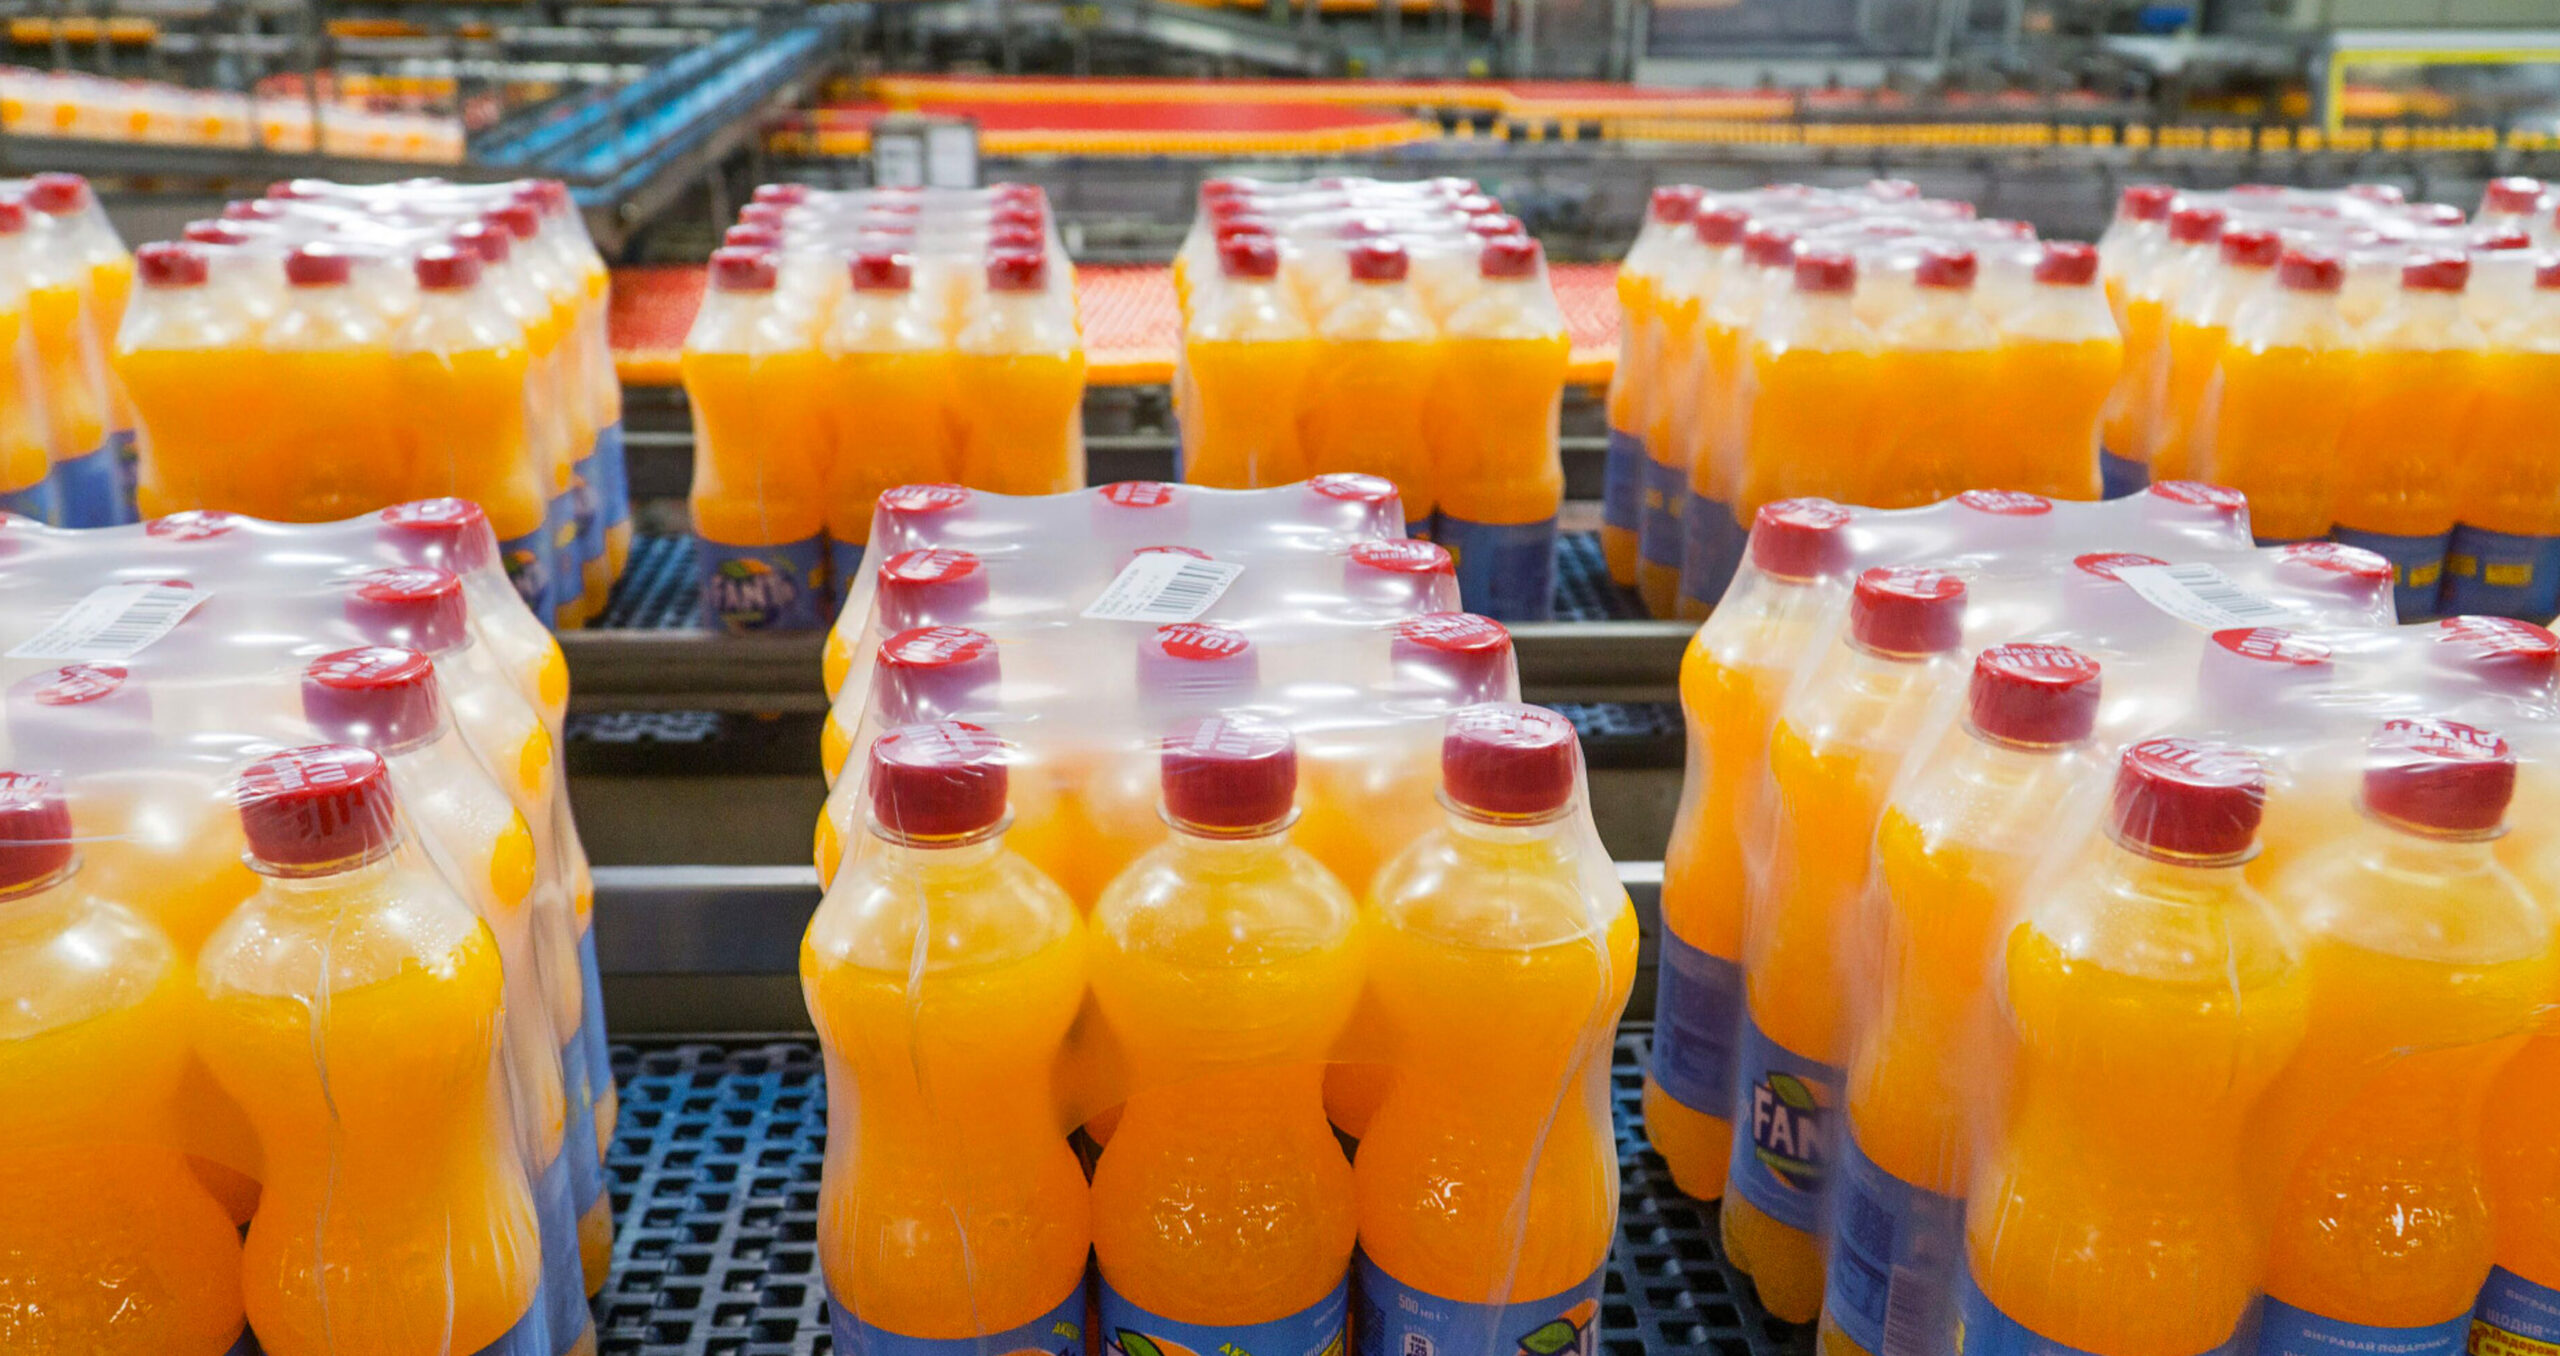 The European Commission guidance gives the standardisation of packaging as an example of how its guidelines could work in practice. (Photo: Vincent Mundy/Bloomberg) 